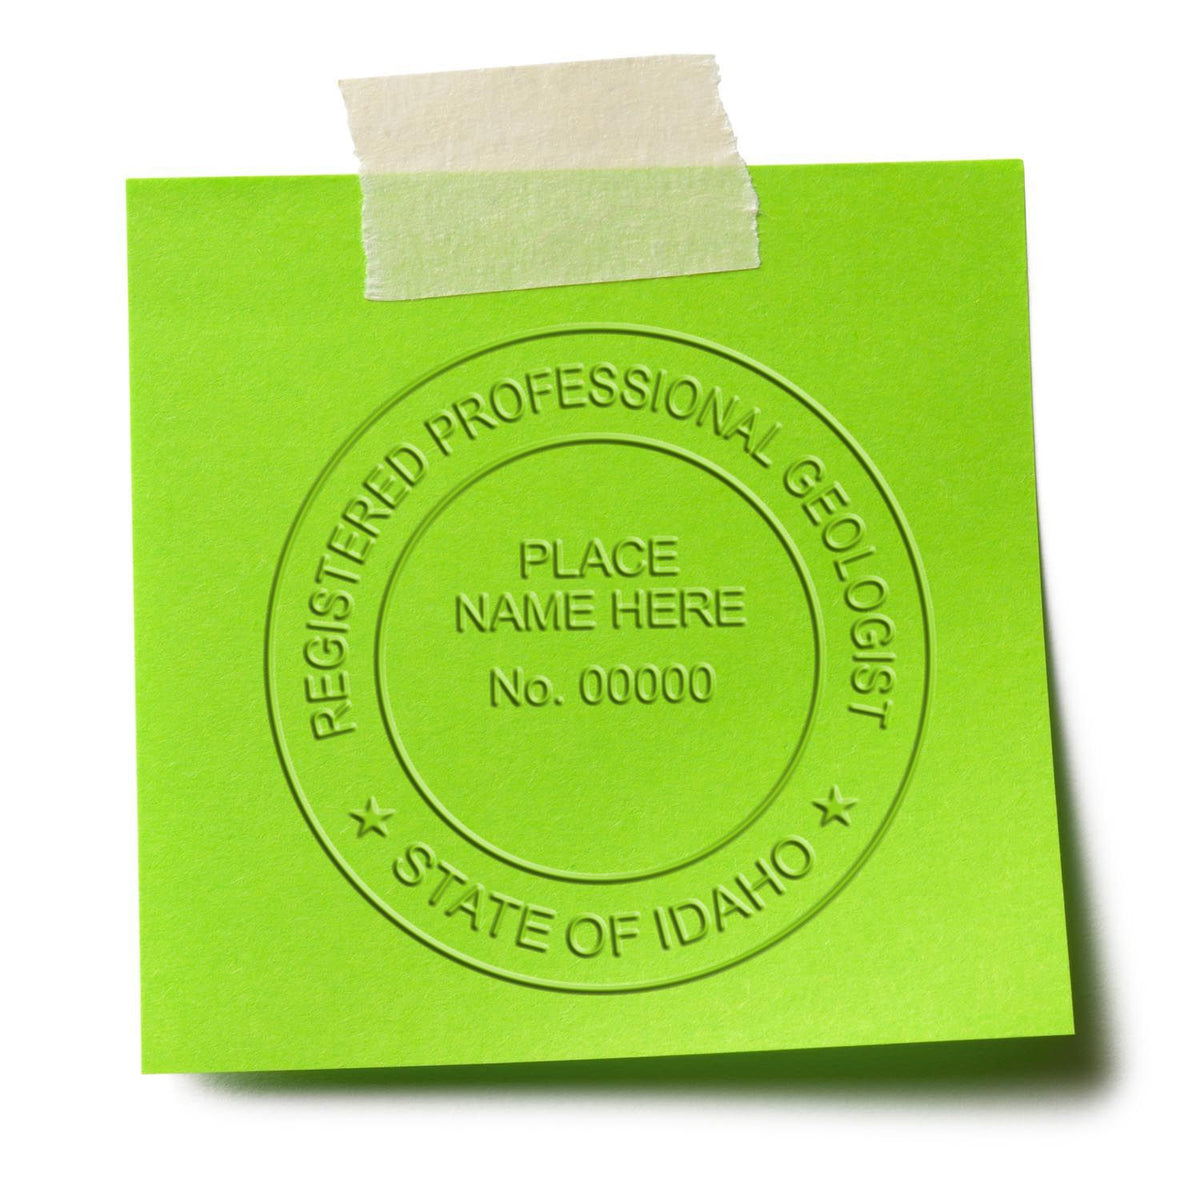 An in use photo of the Soft Idaho Professional Geologist Seal showing a sample imprint on a cardstock